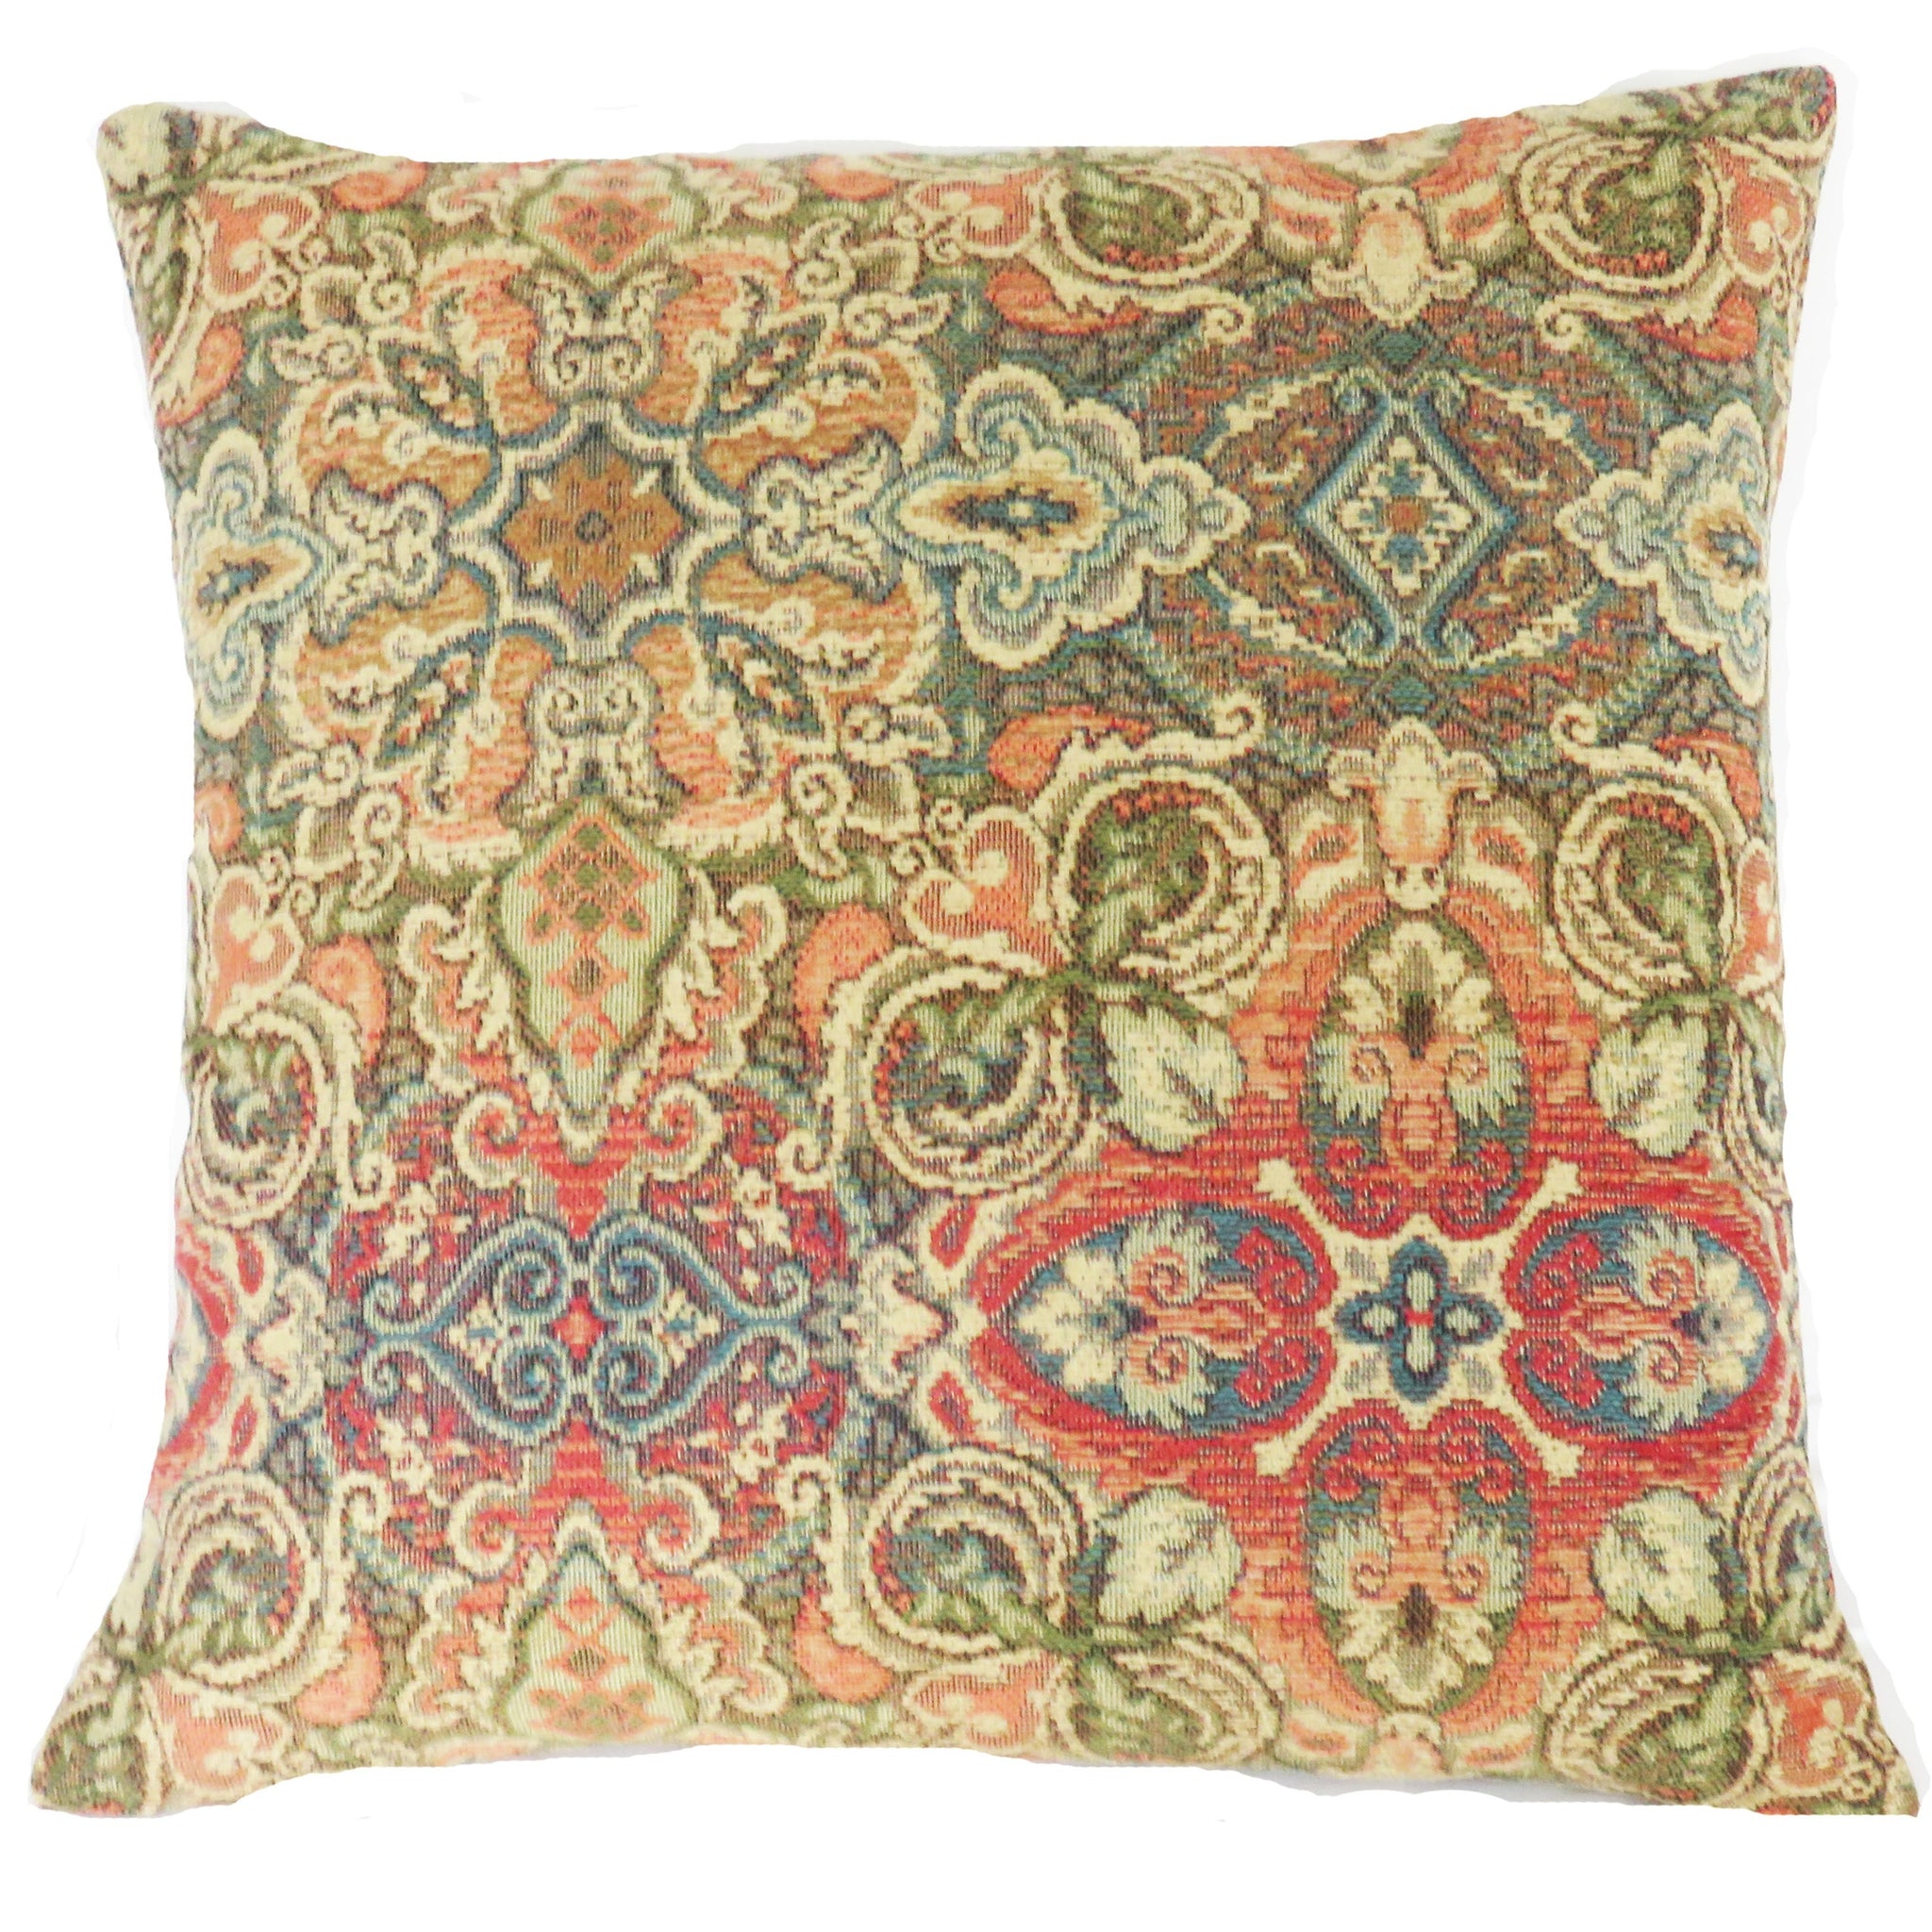 colorful medallion tapestry pillow cover in orange, blue, red, and green